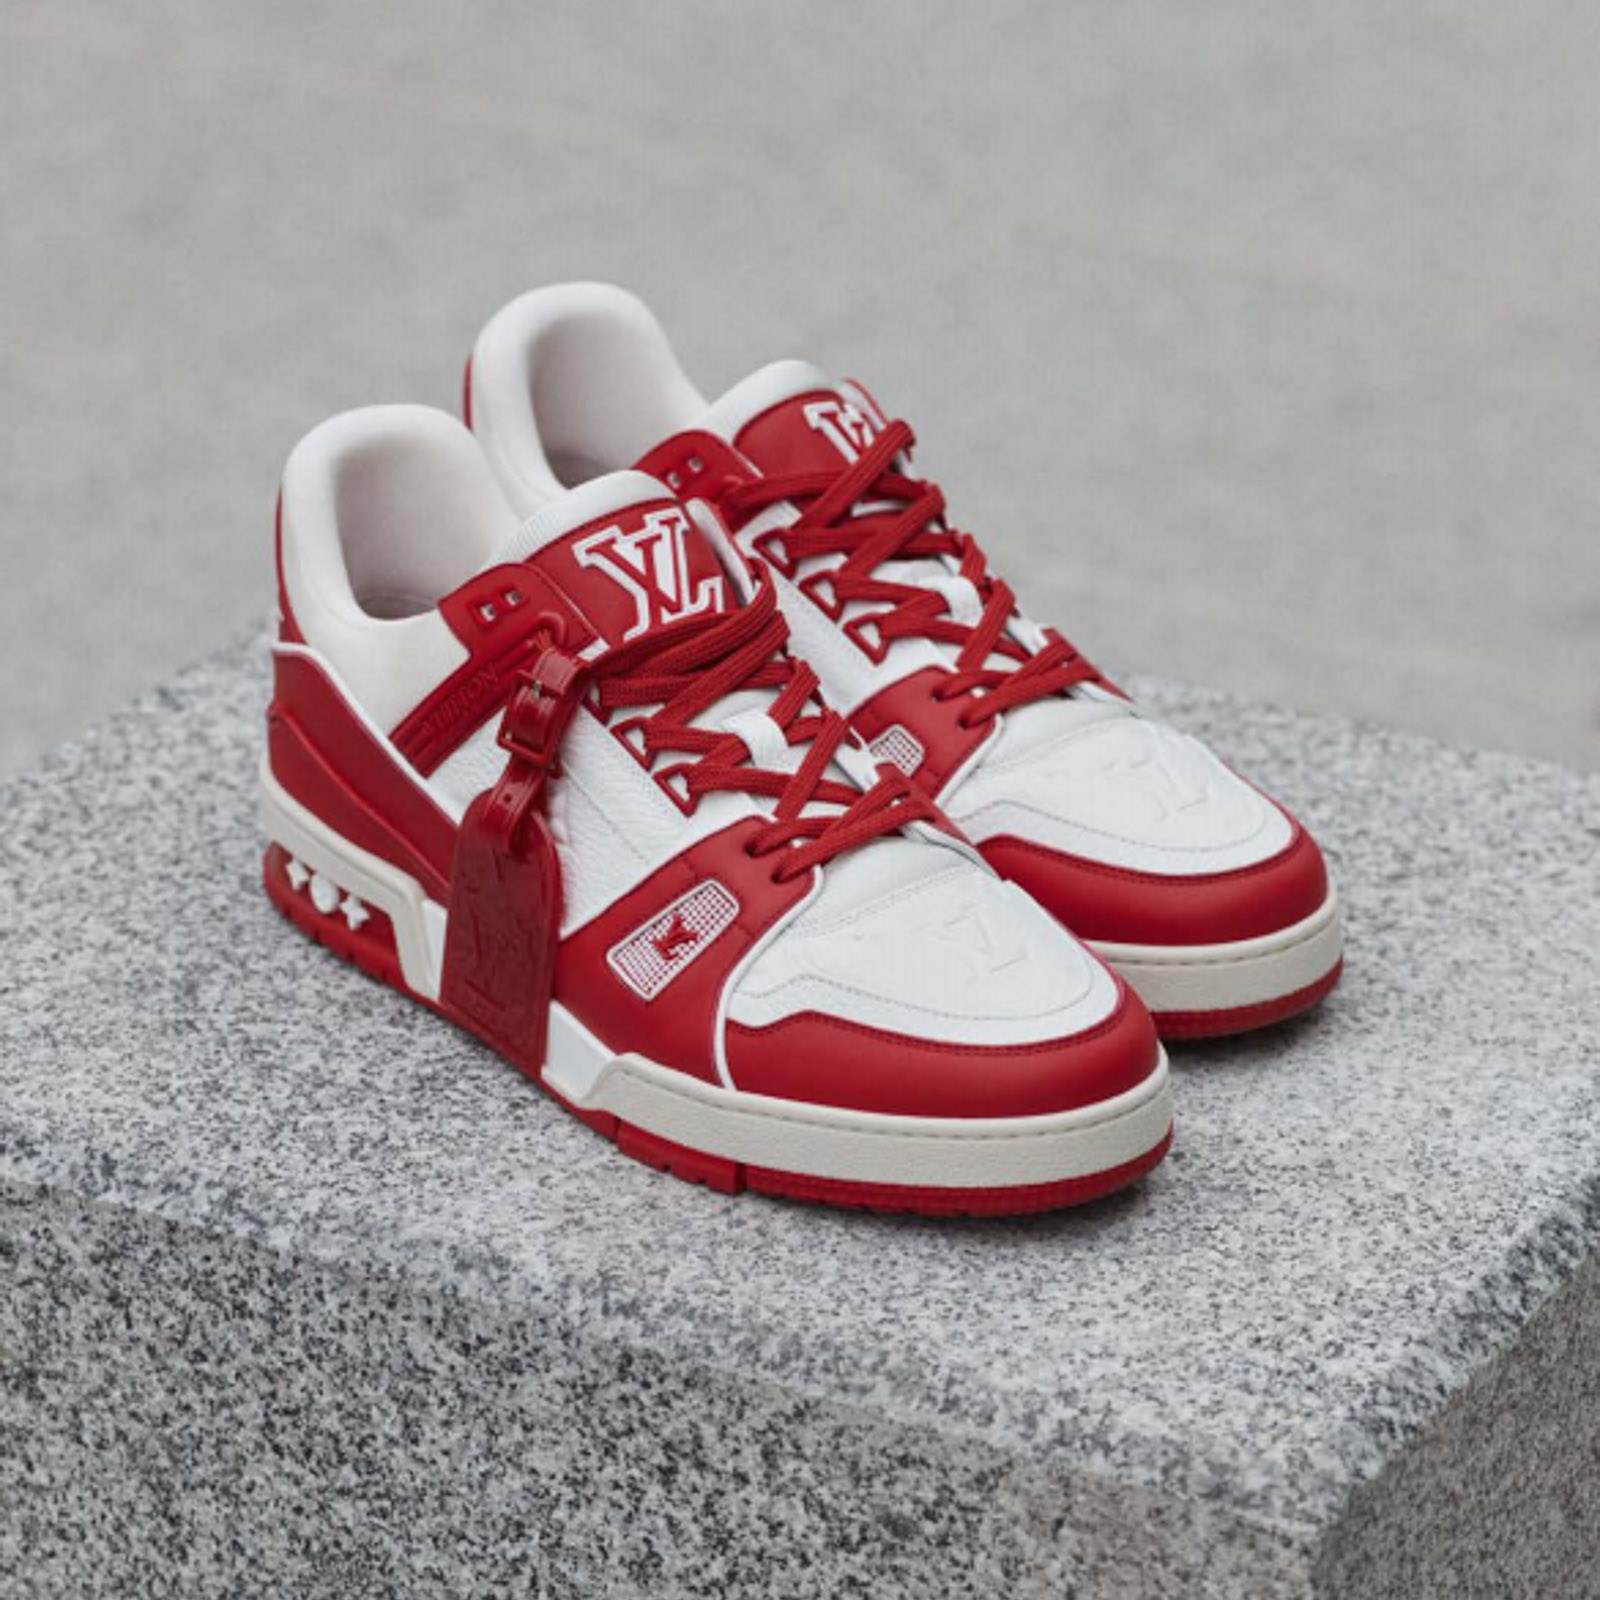 Louis Vuitton Fights AIDS, Covid With Virgil Abloh-Signed Shoe